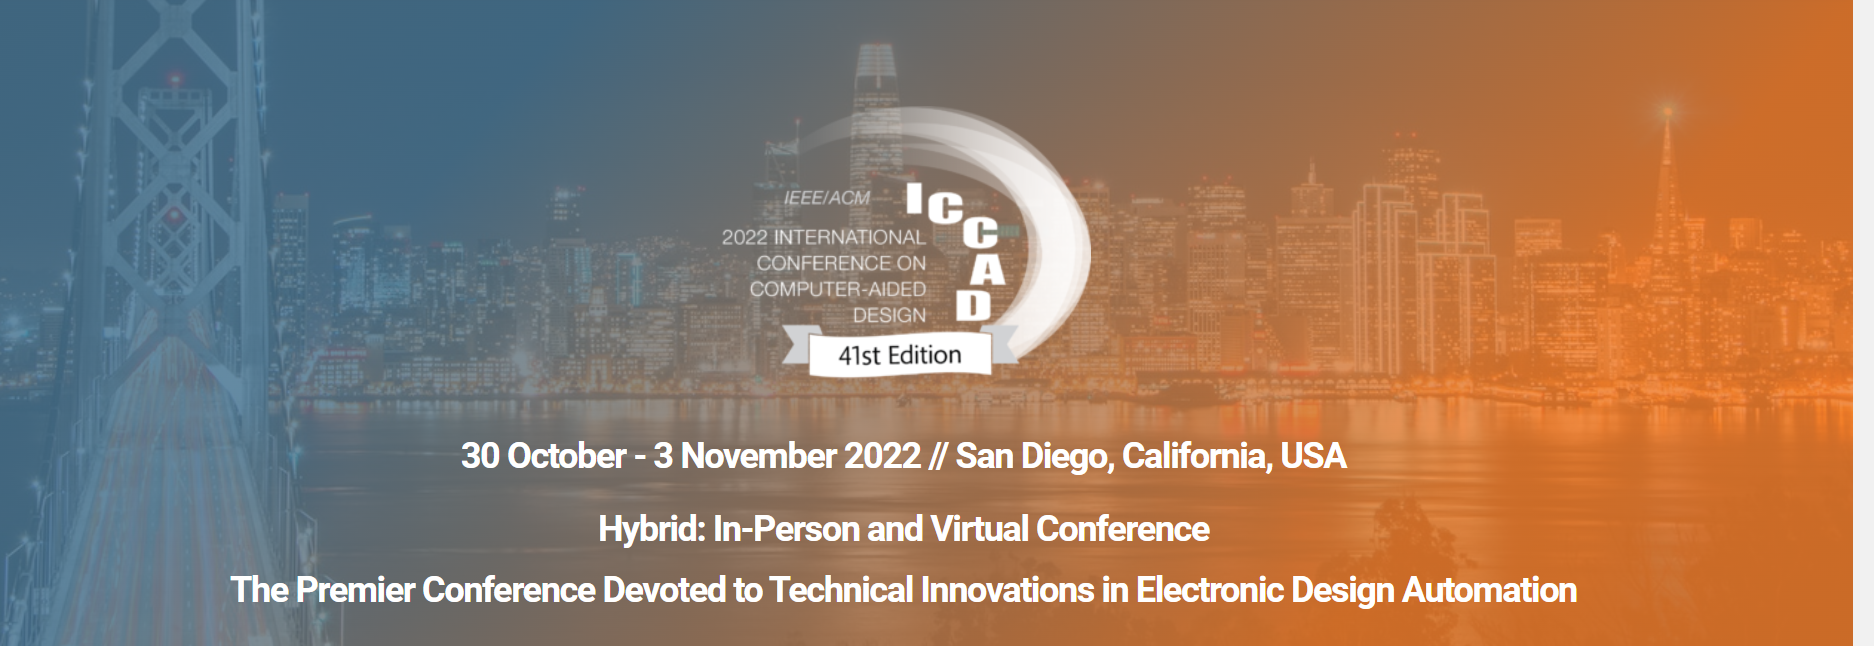 ICCAD 2022 The Premier Conference Devoted to Technical Innovations in Electronic Design Automation